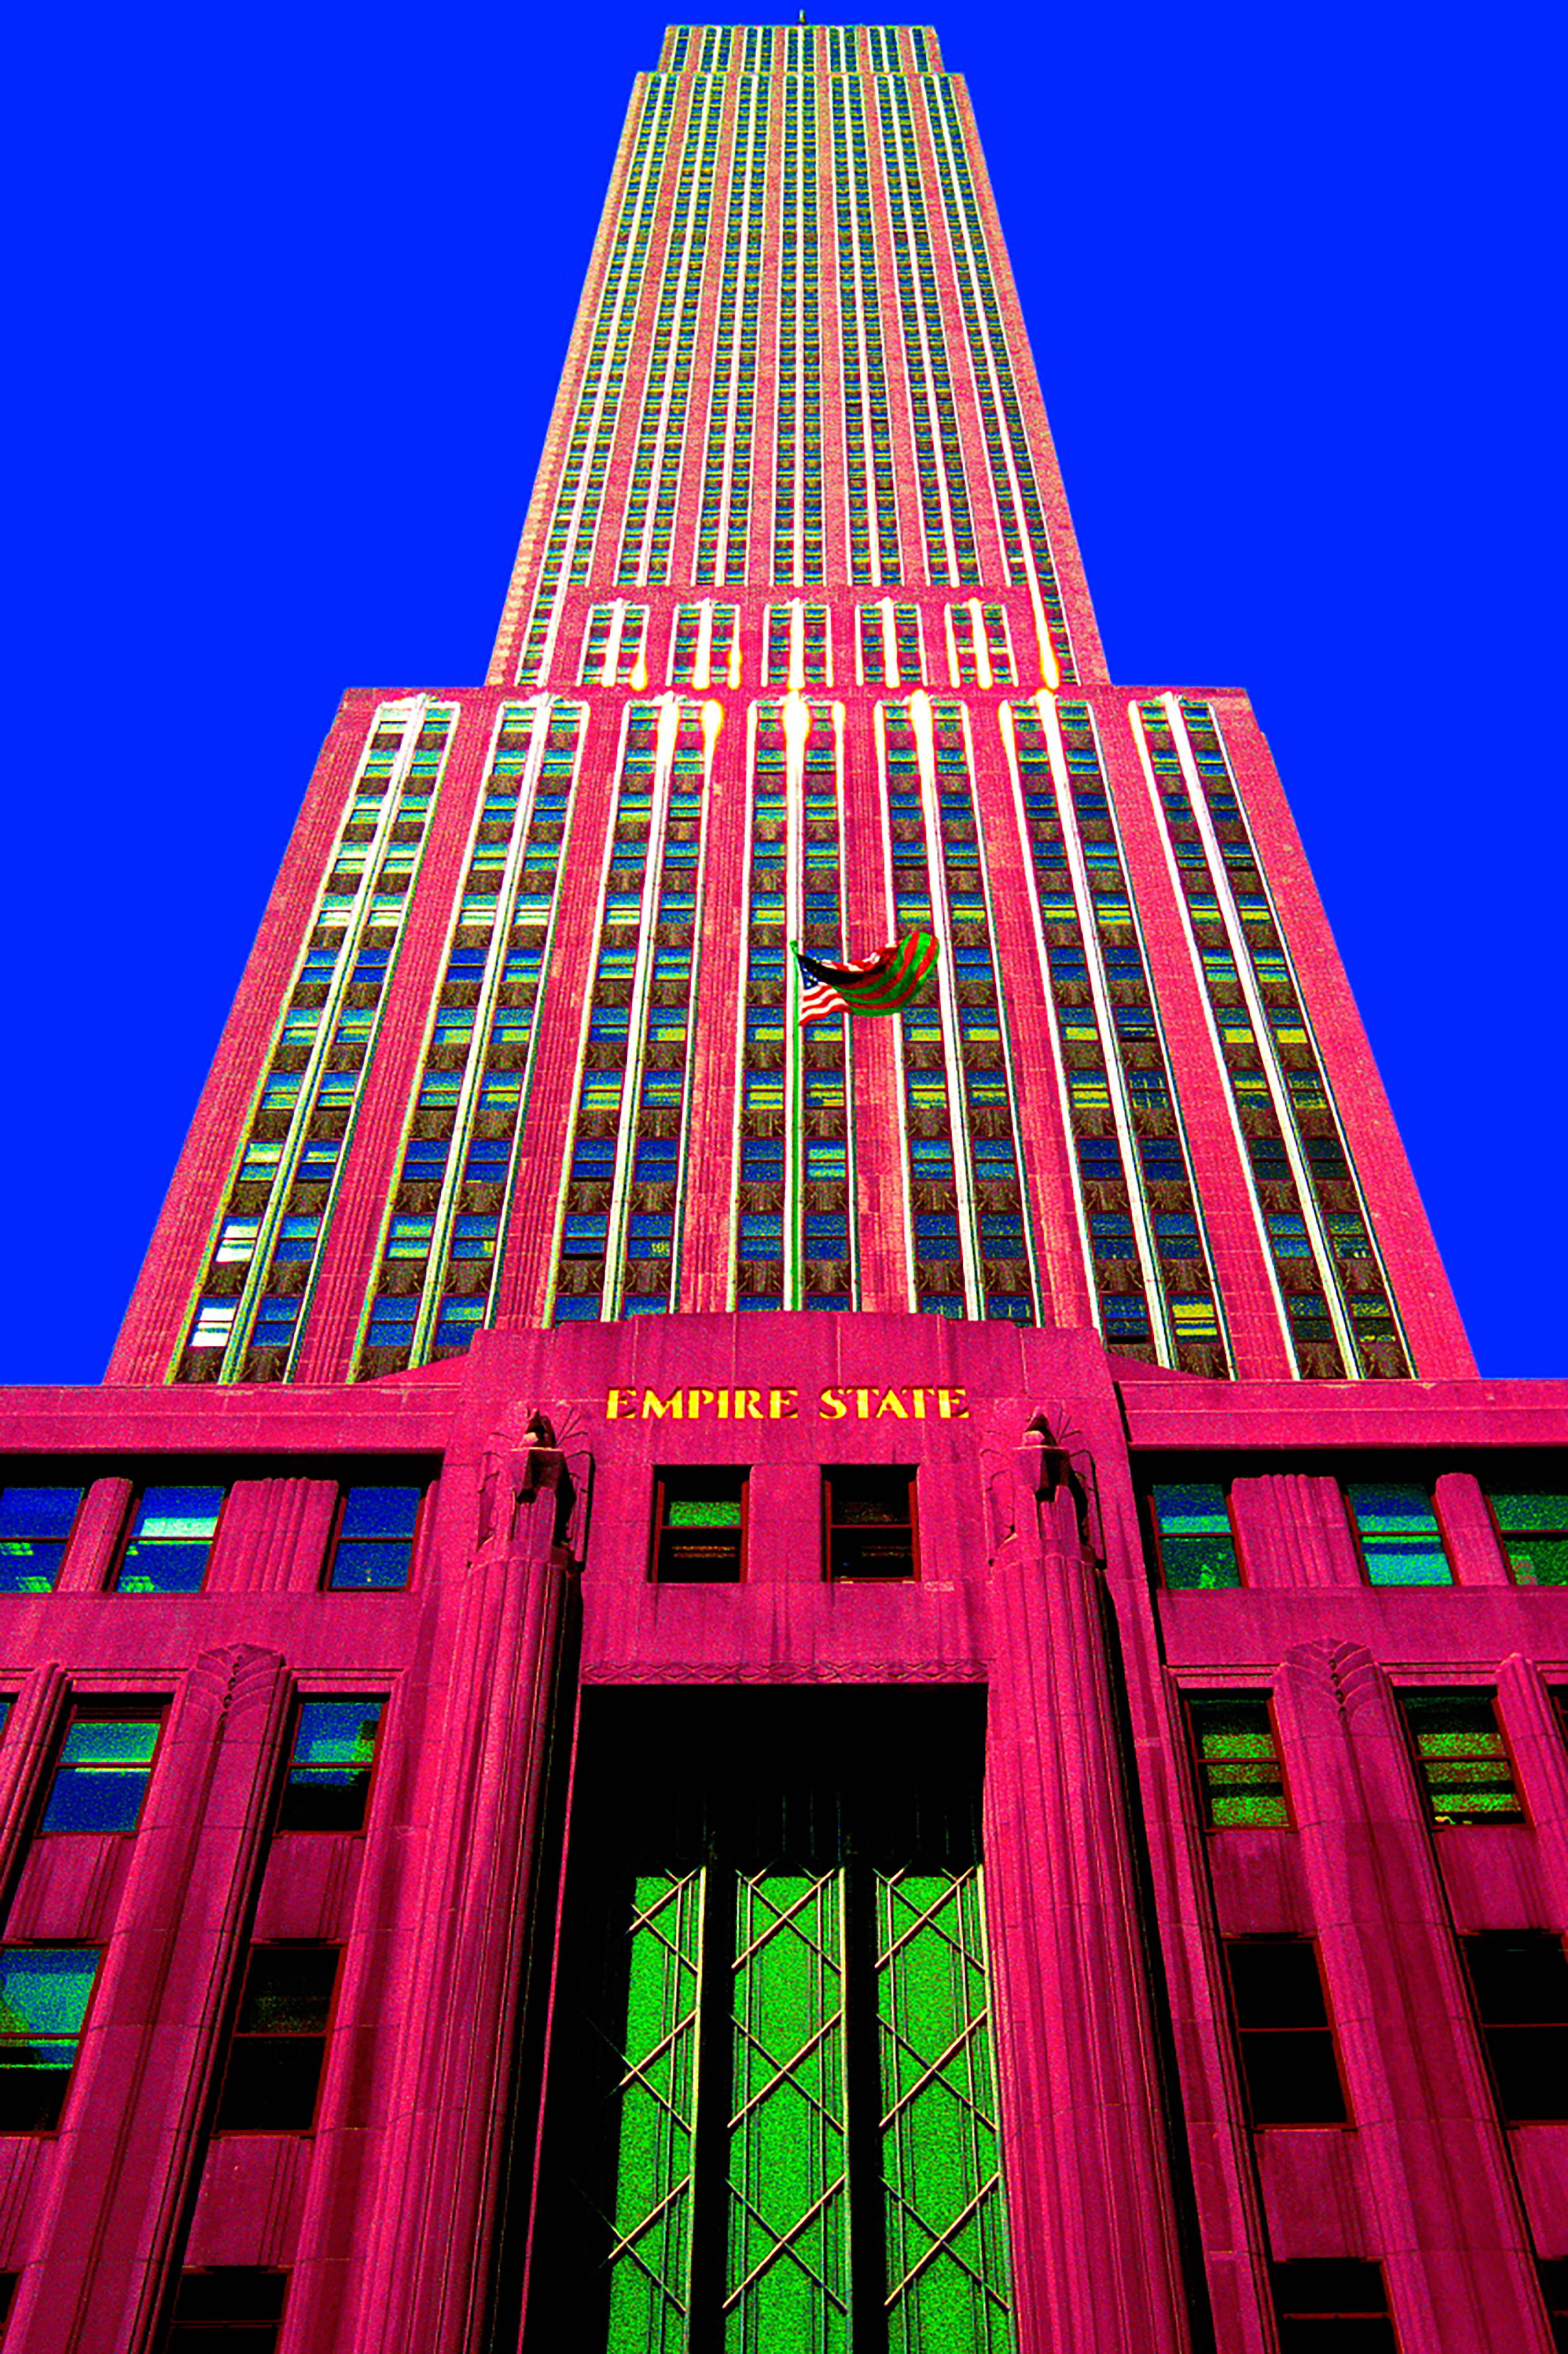 Empire State - Photograph by Francis Apesteguy